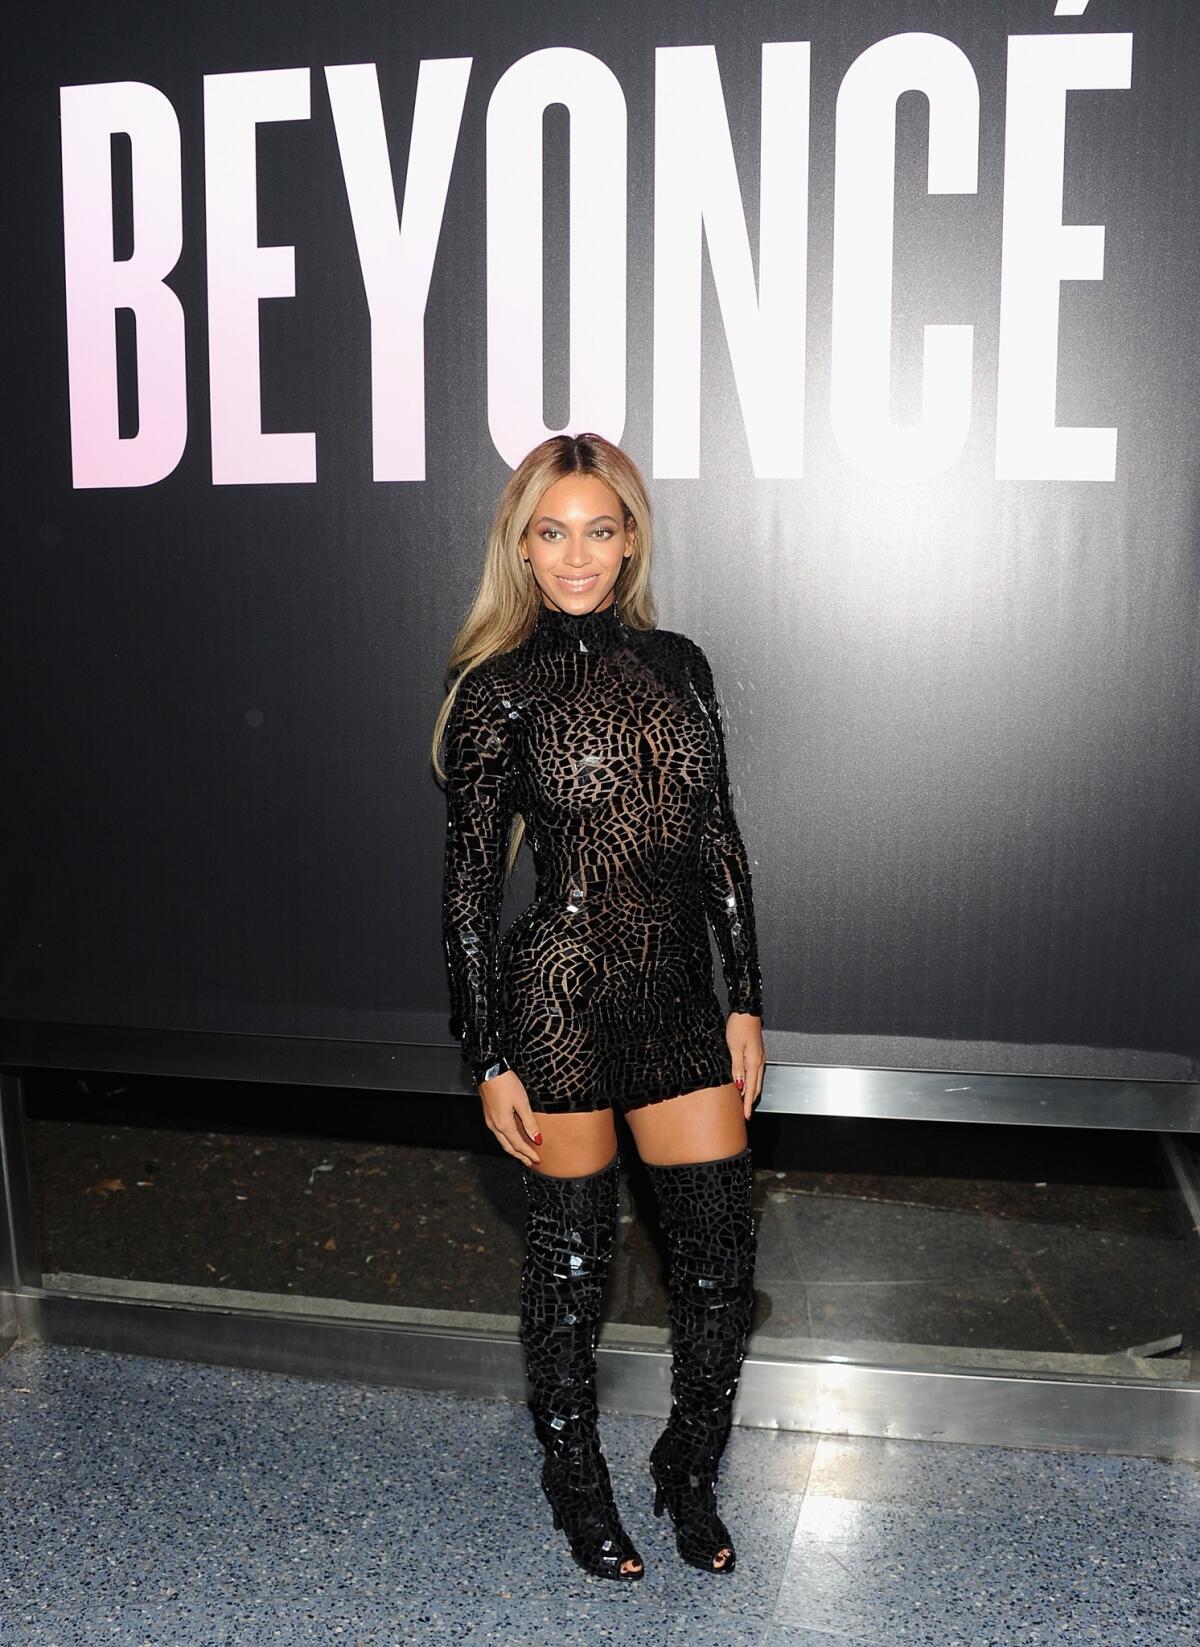 Beyonce stopped by a Wal-Mart store for a little shopping of her own, including a copy of her fifth self-titled album. Then she played Santa, paying for shoppers' purchases to the tune of $37,500.